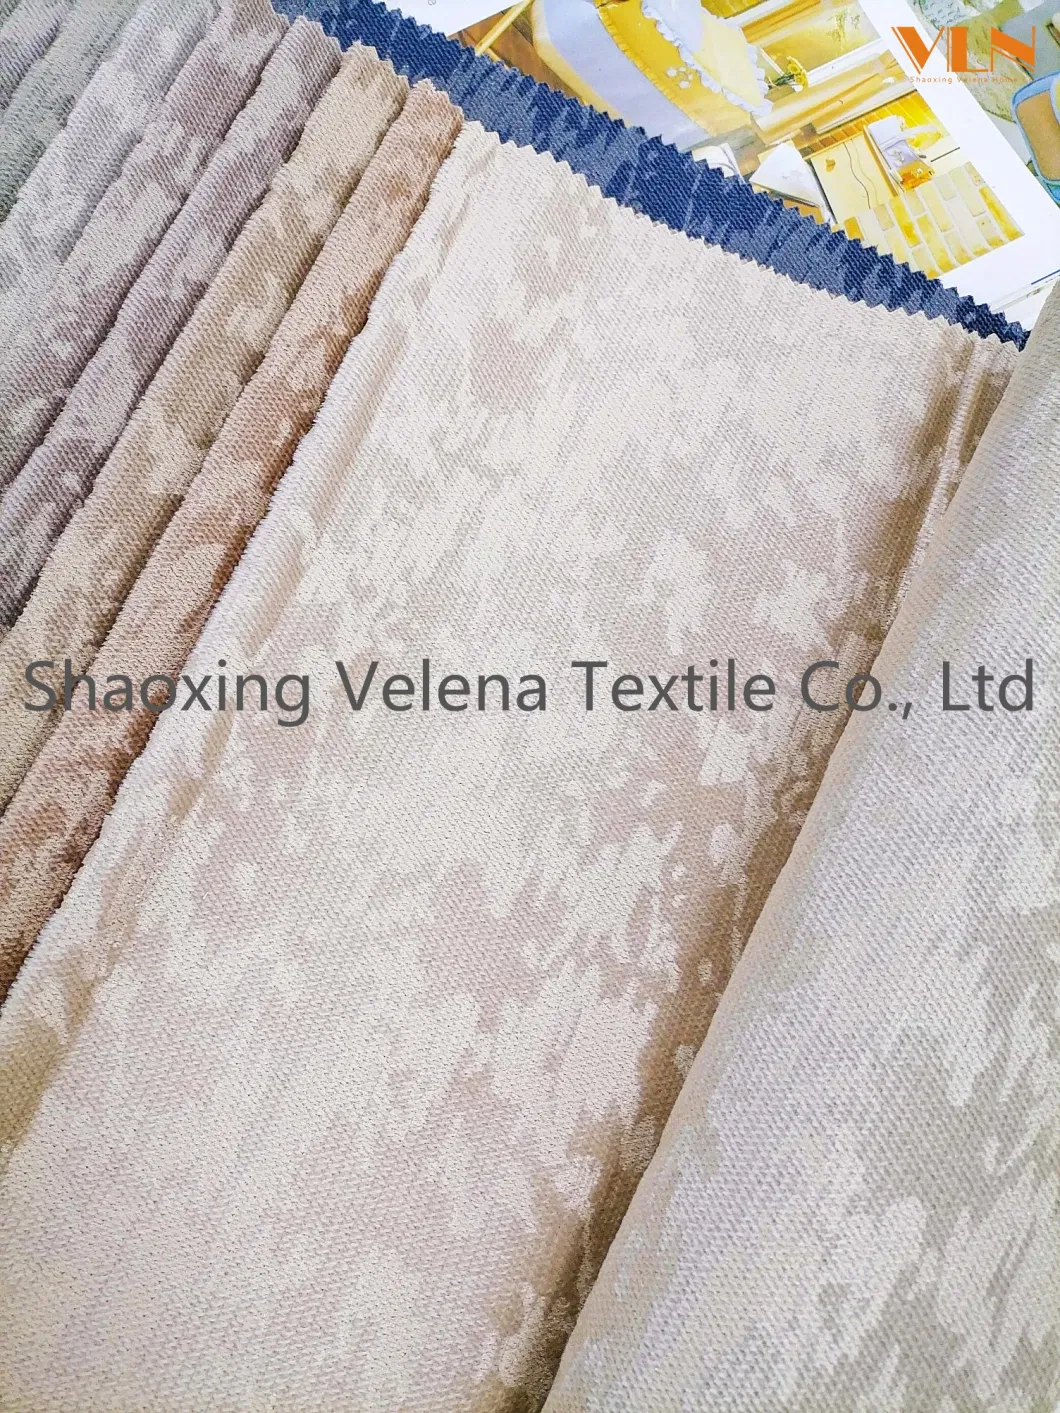 Hot Sale 100% Polyester Jaguar Twill Velvet Dyeing with Foil Upholstery Furniture Home Textile Sofa Fabric